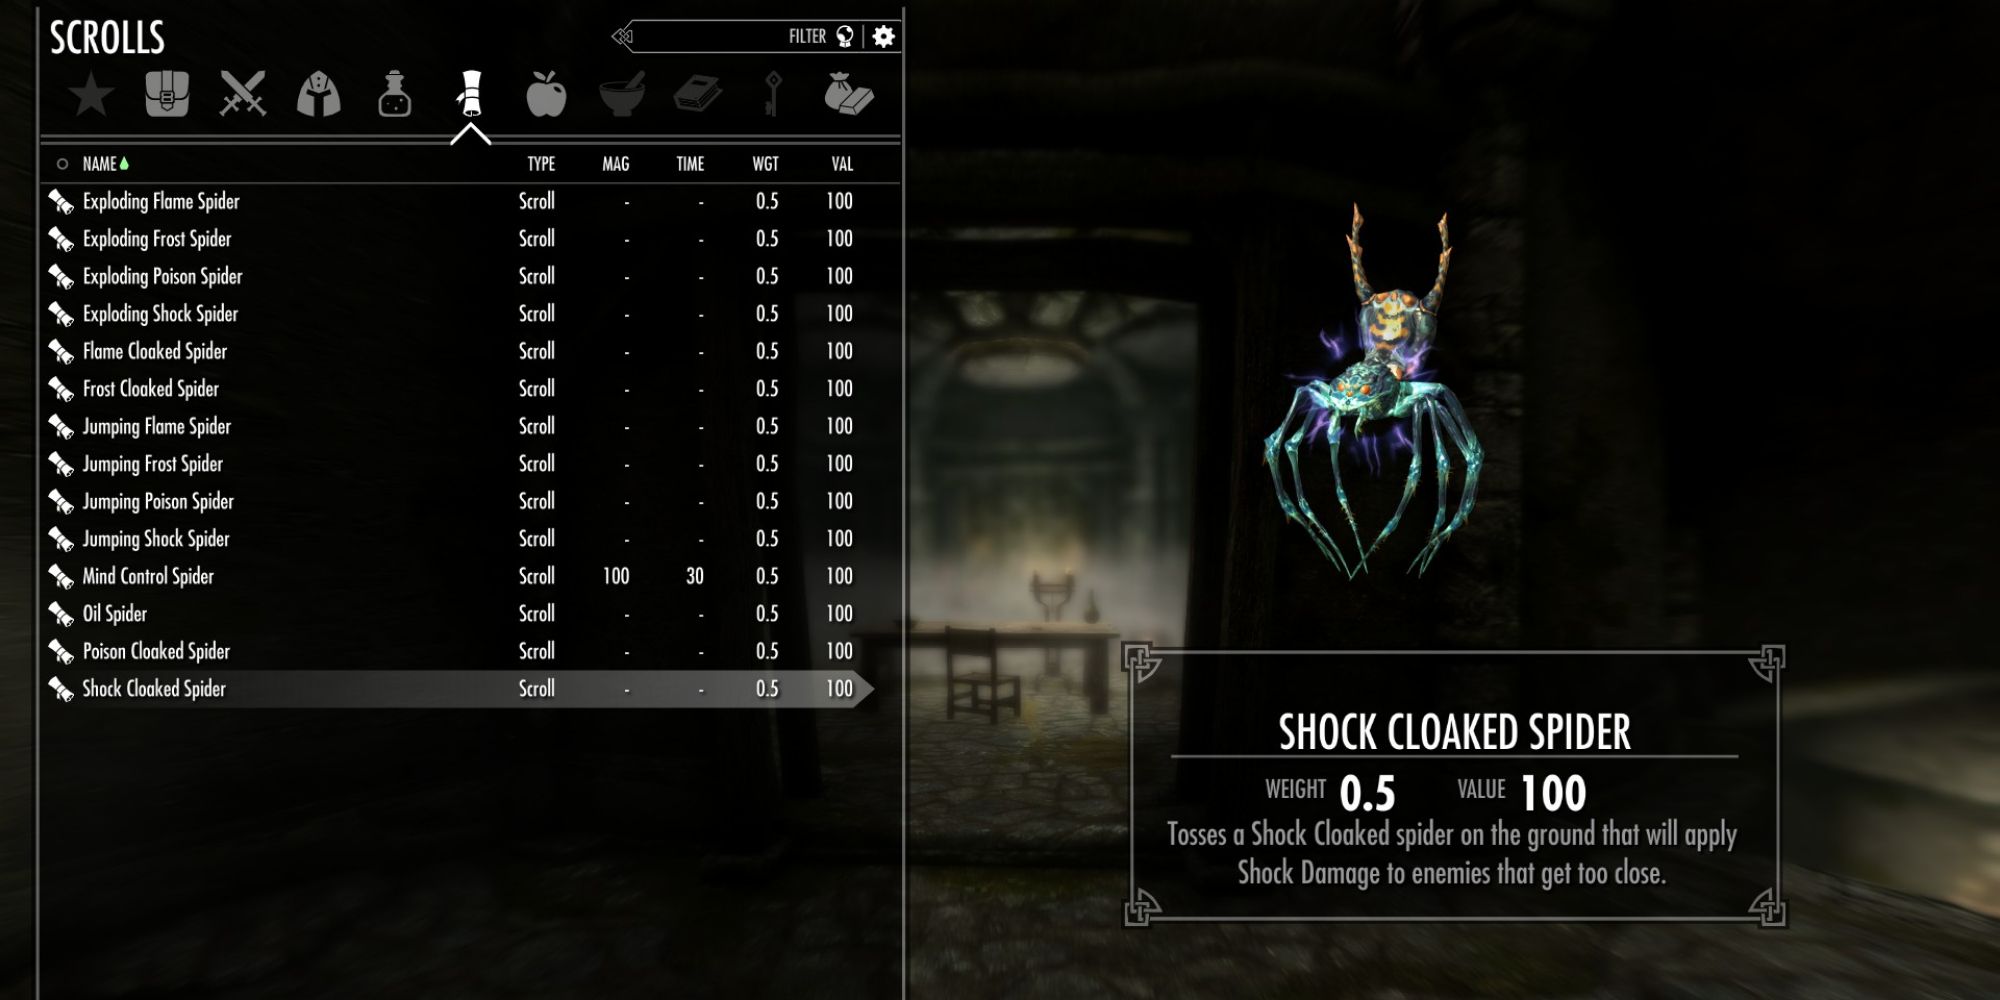 Skyrim shock cloaked spider scroll inventory